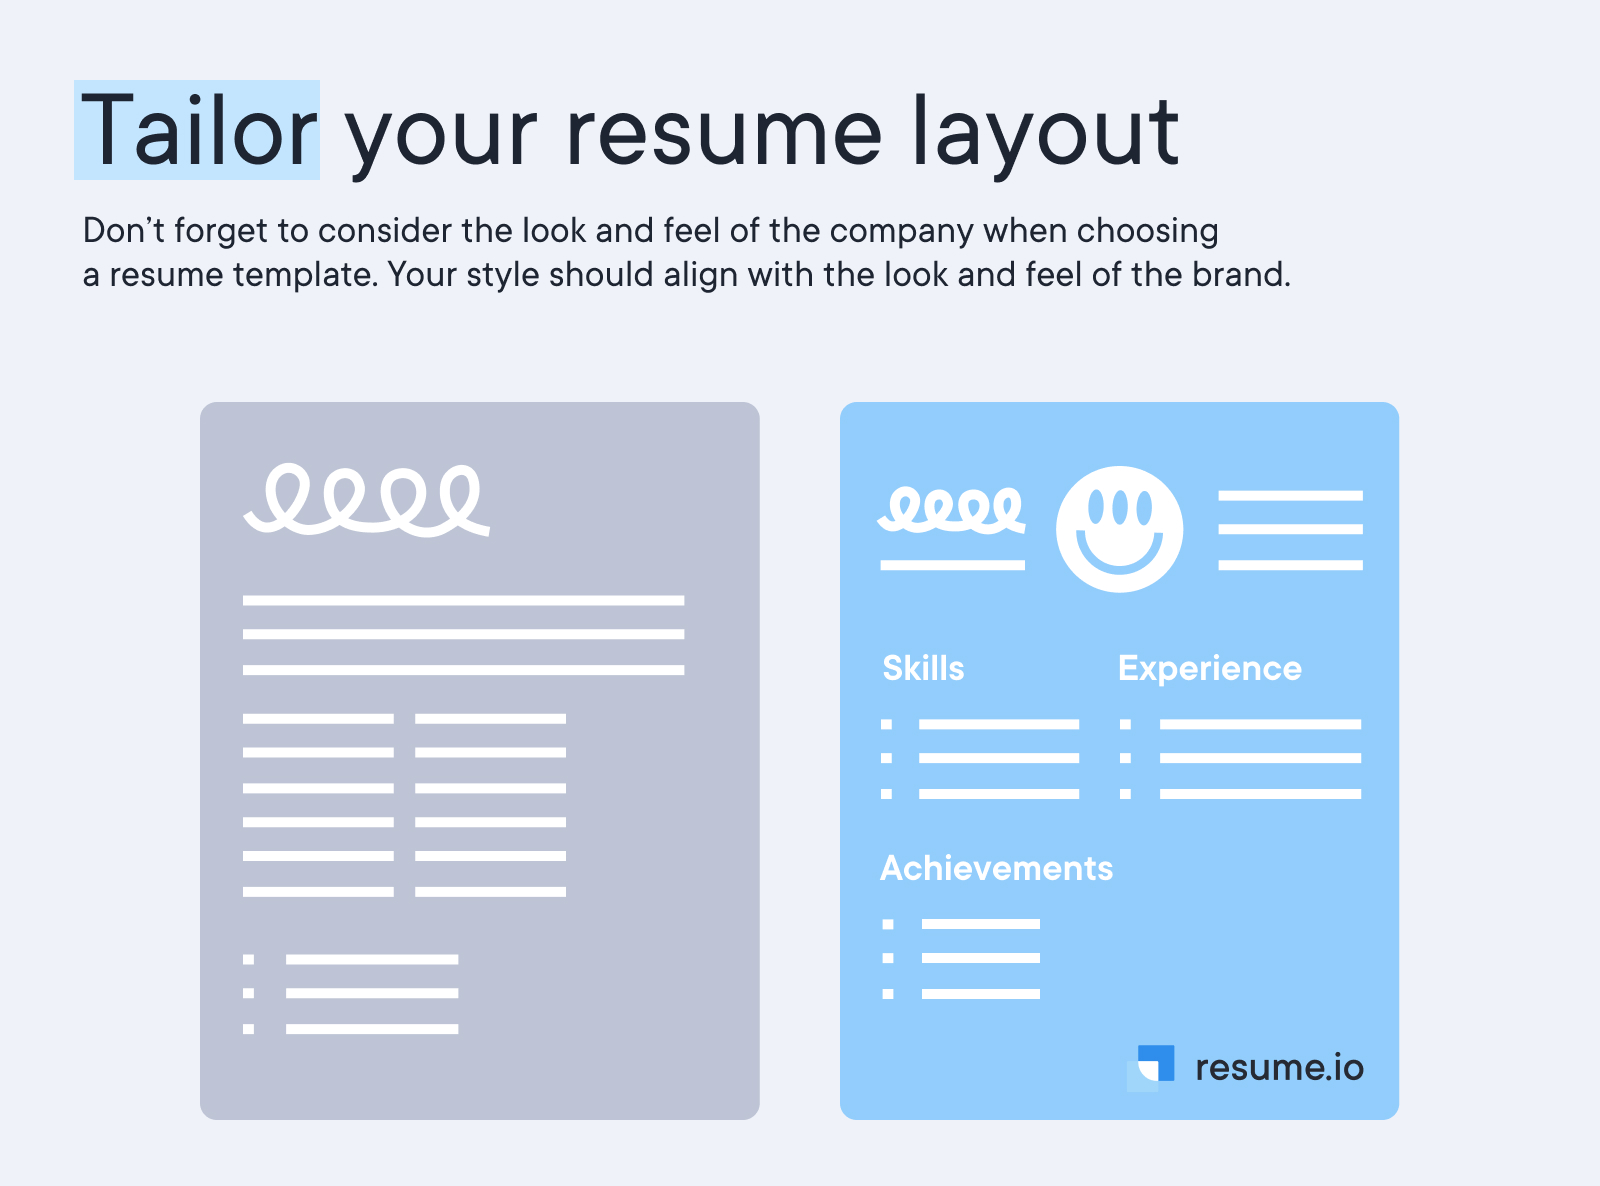 Tailor your resume layout